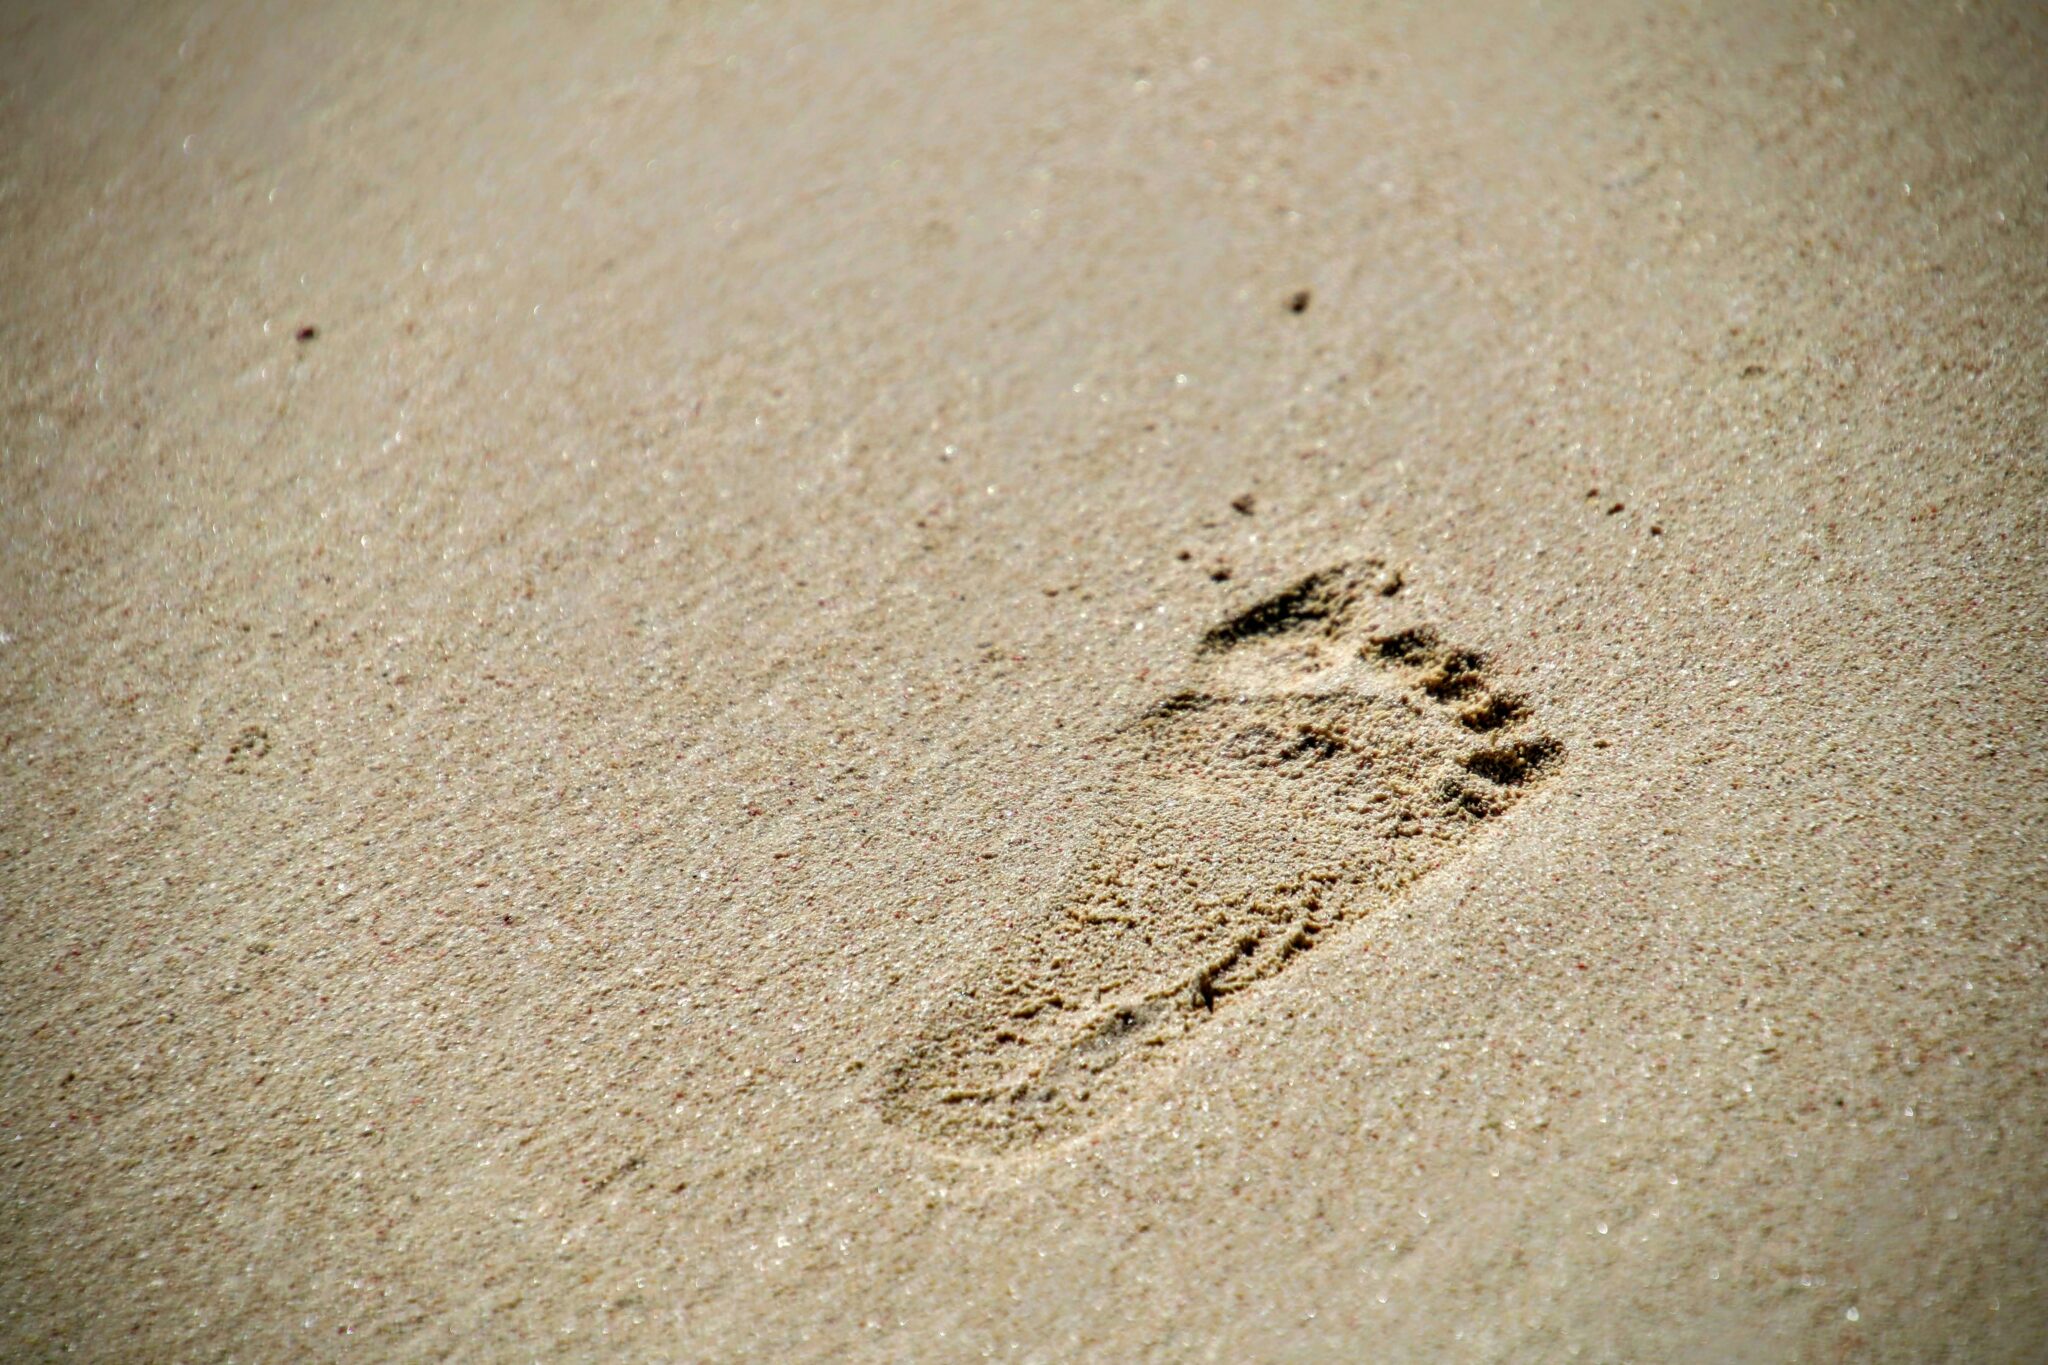 A picture of a single footprint in the sand.